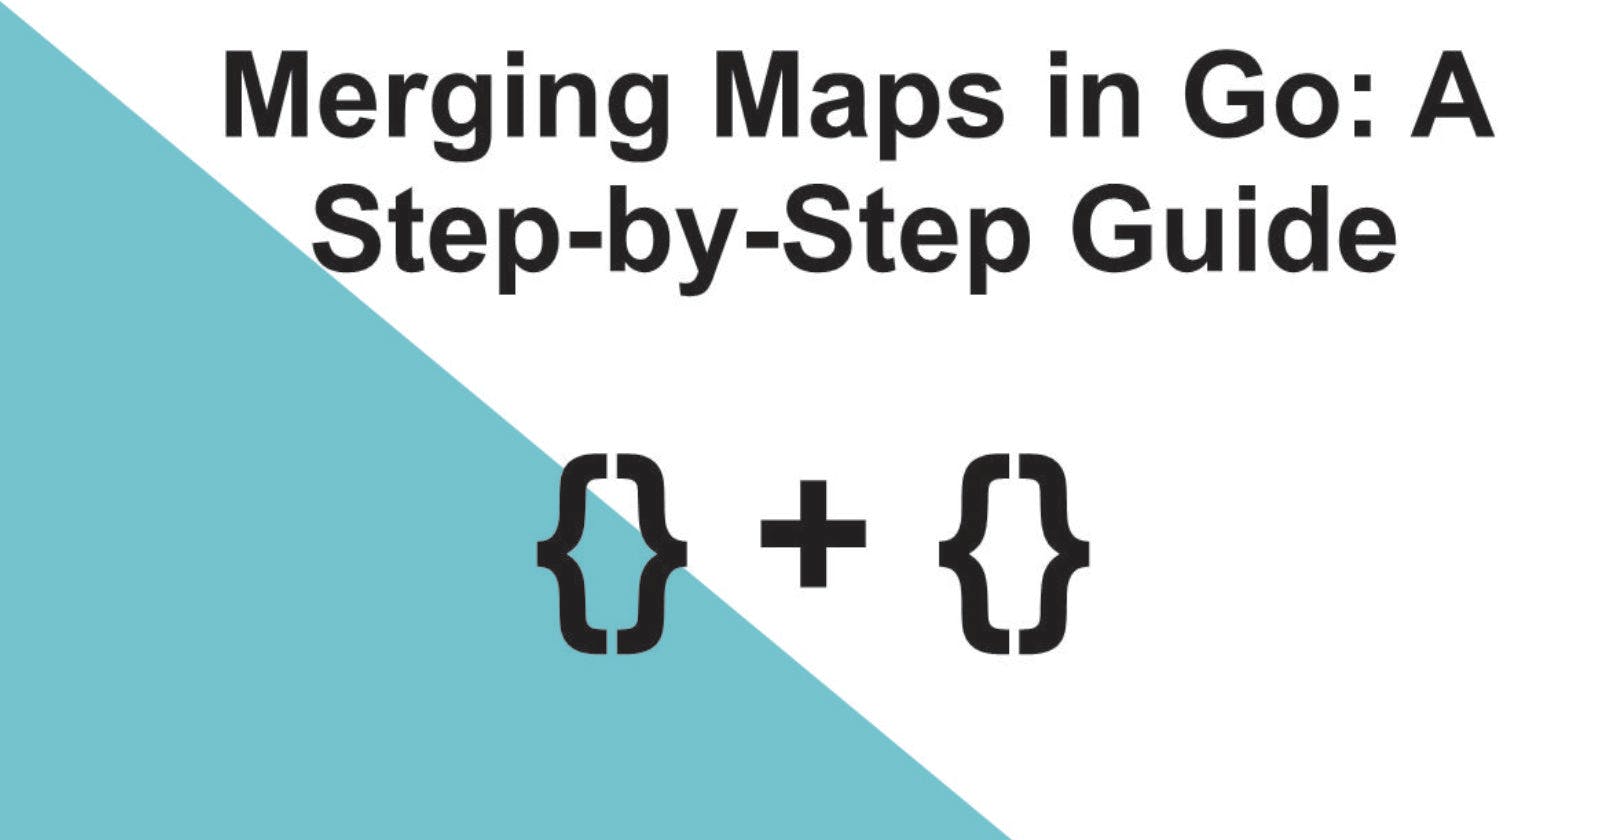 Merging Maps in Go: A Step-by-Step Guide